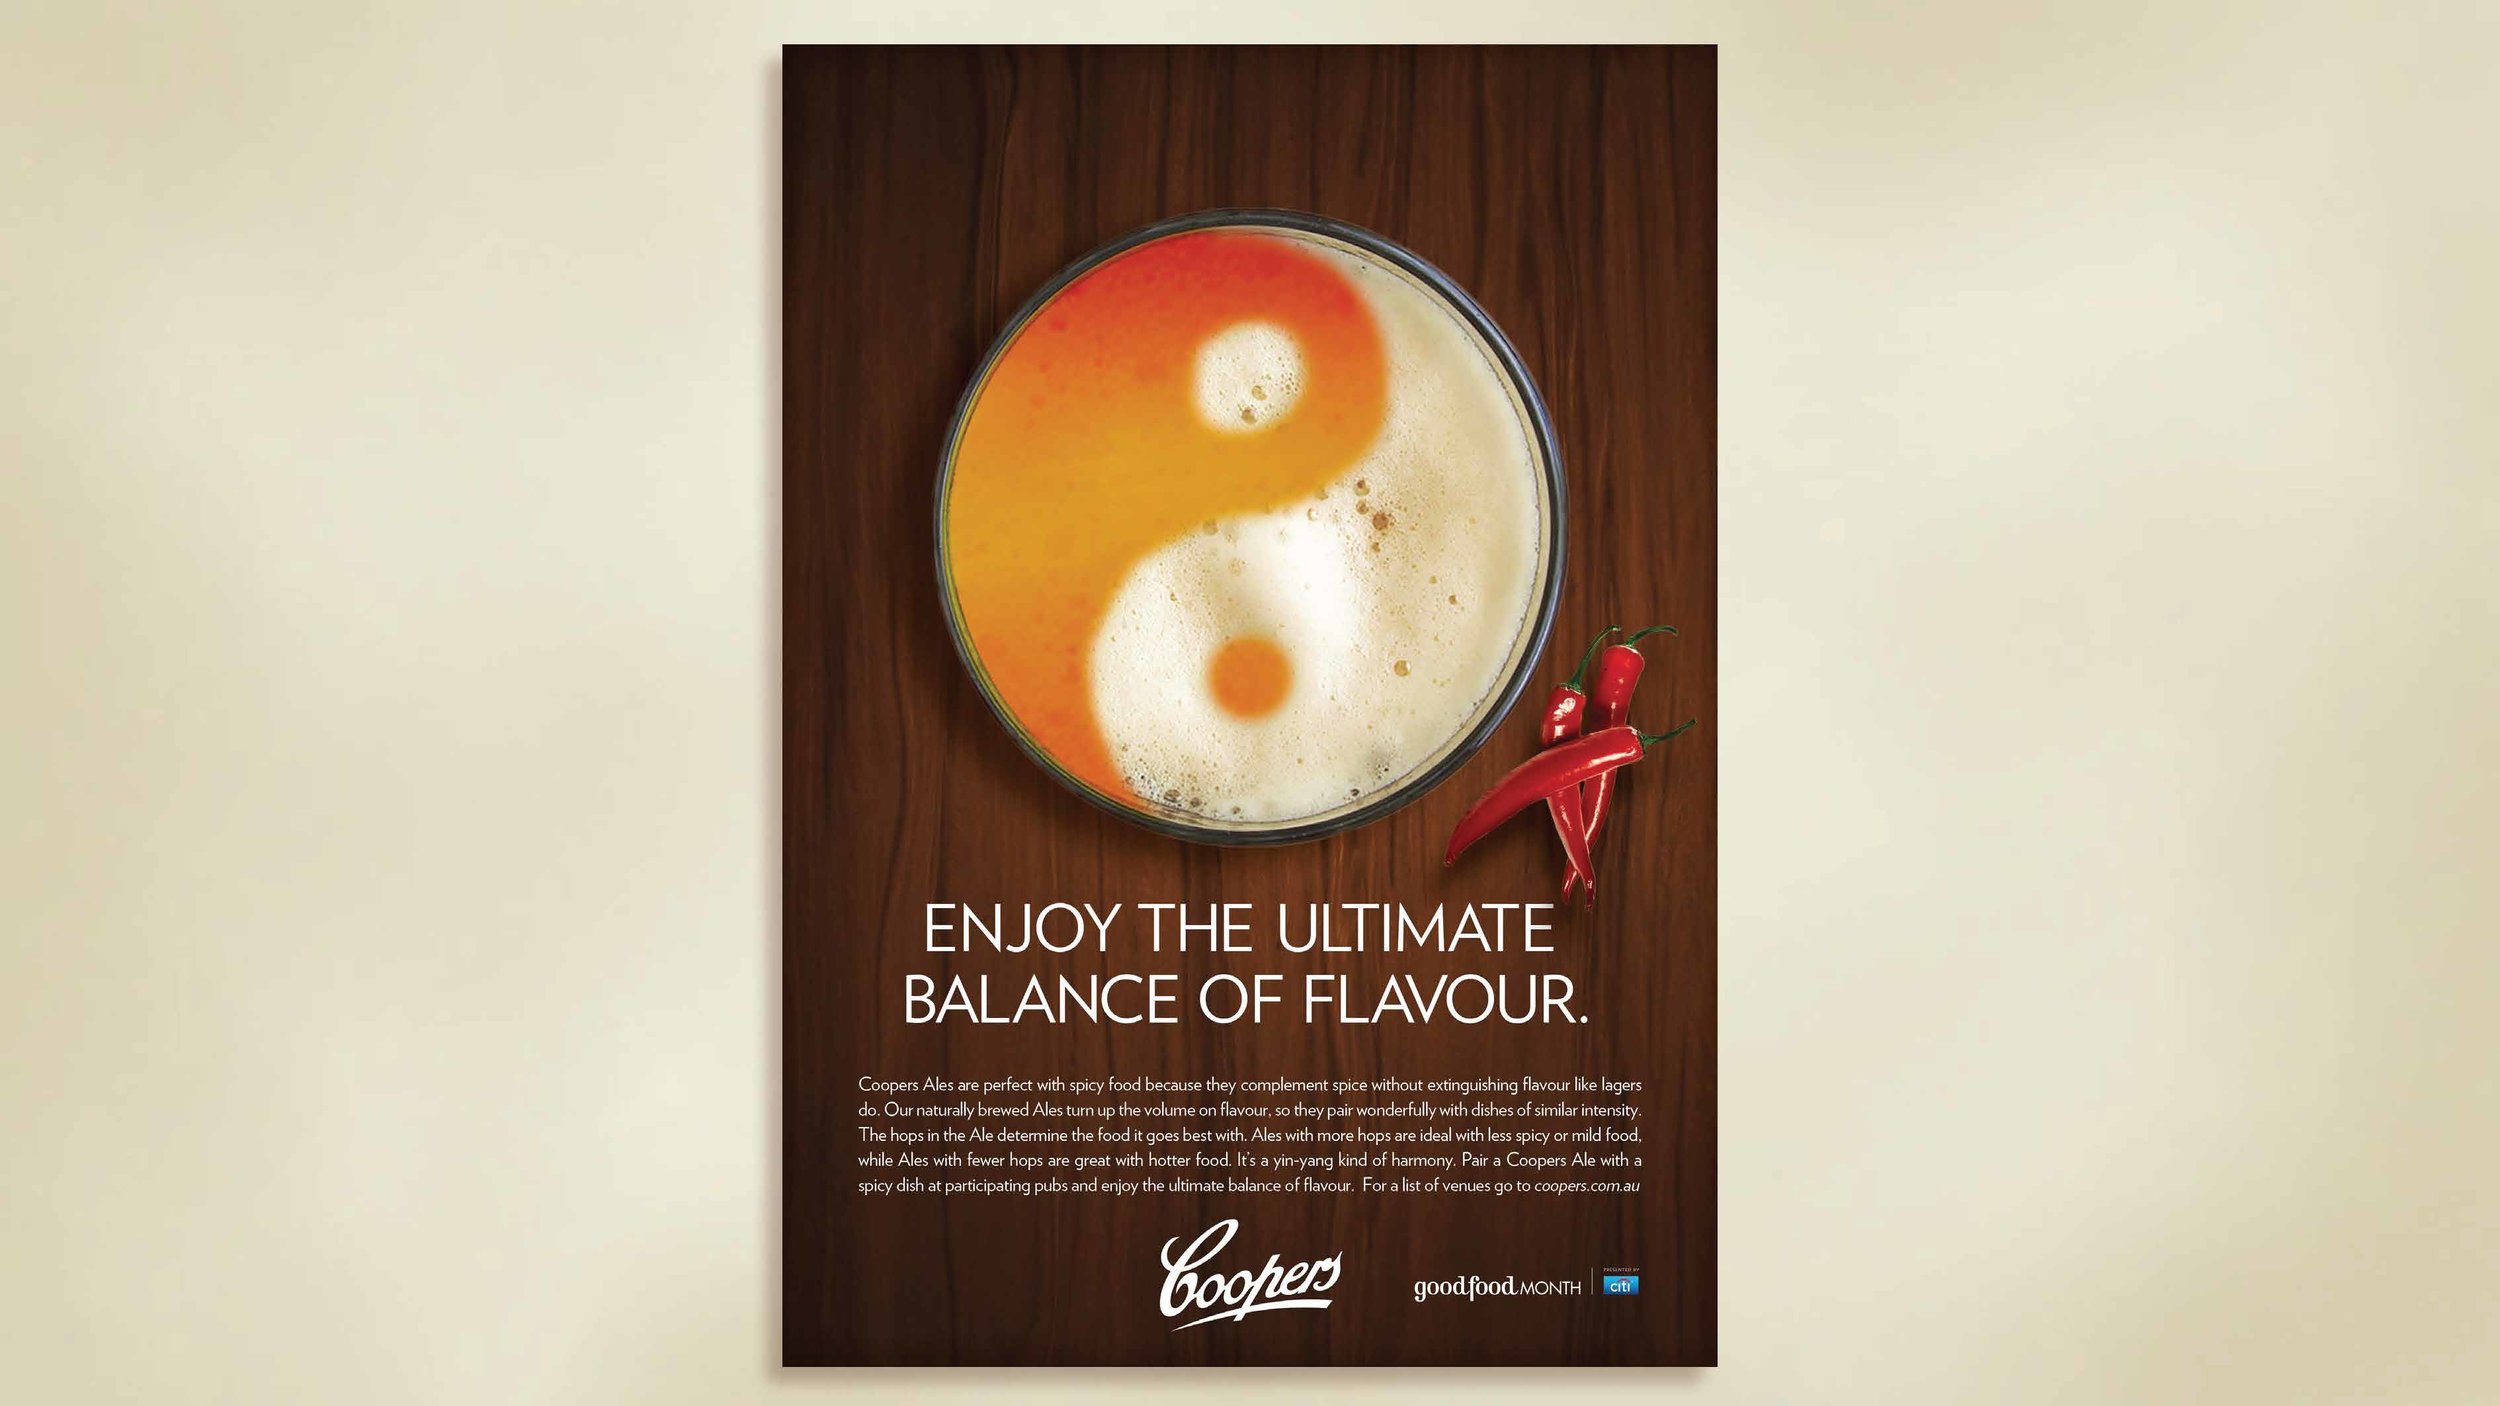 Coopers 'Perfect balance' campaign